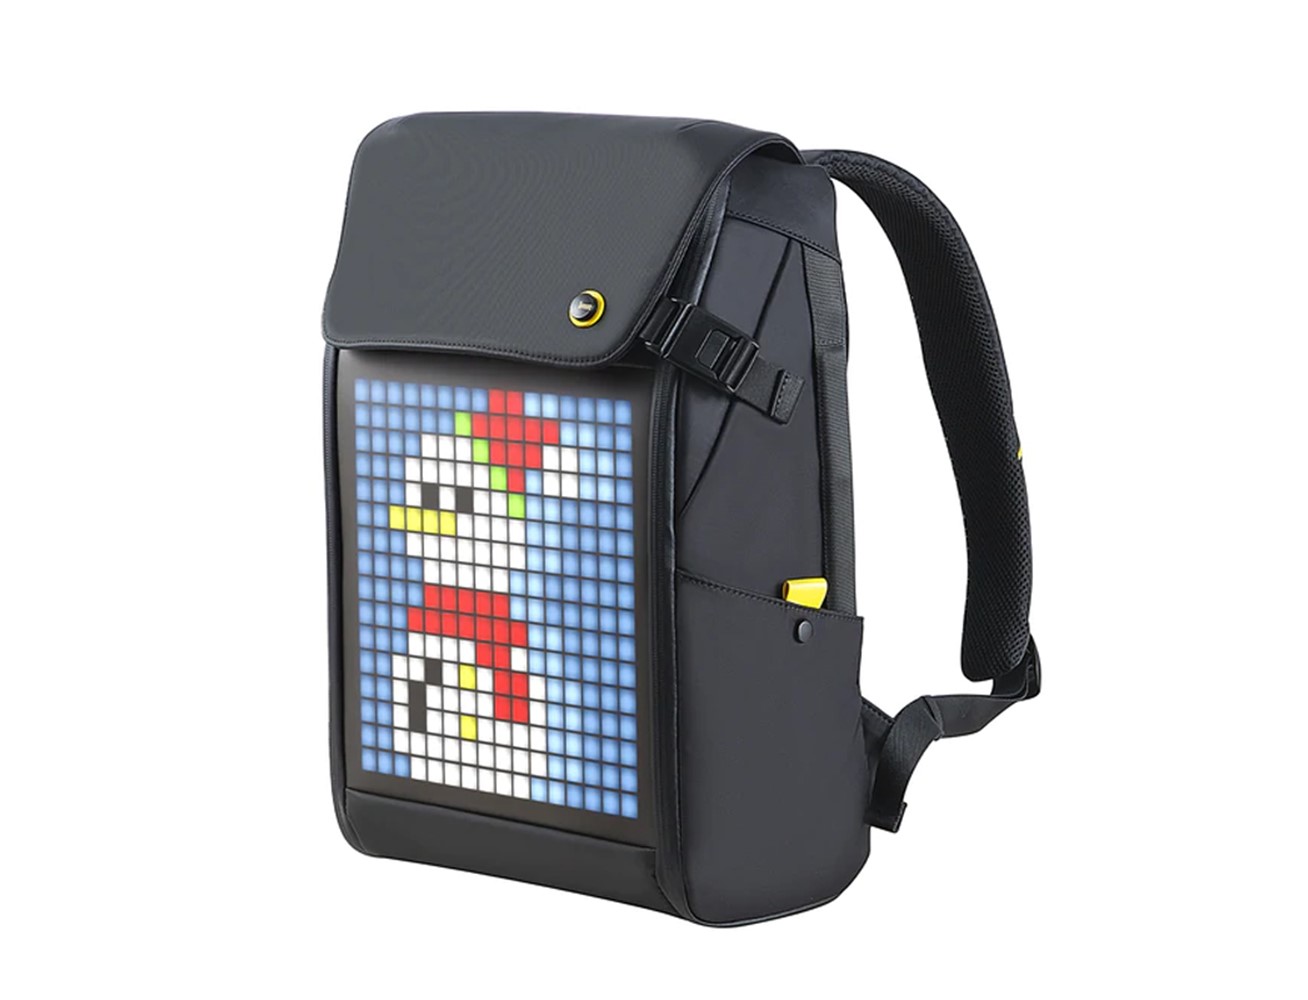 Divoom Backpack-M Customizable Pixel LED Animation Display Bag With App  Control - Black